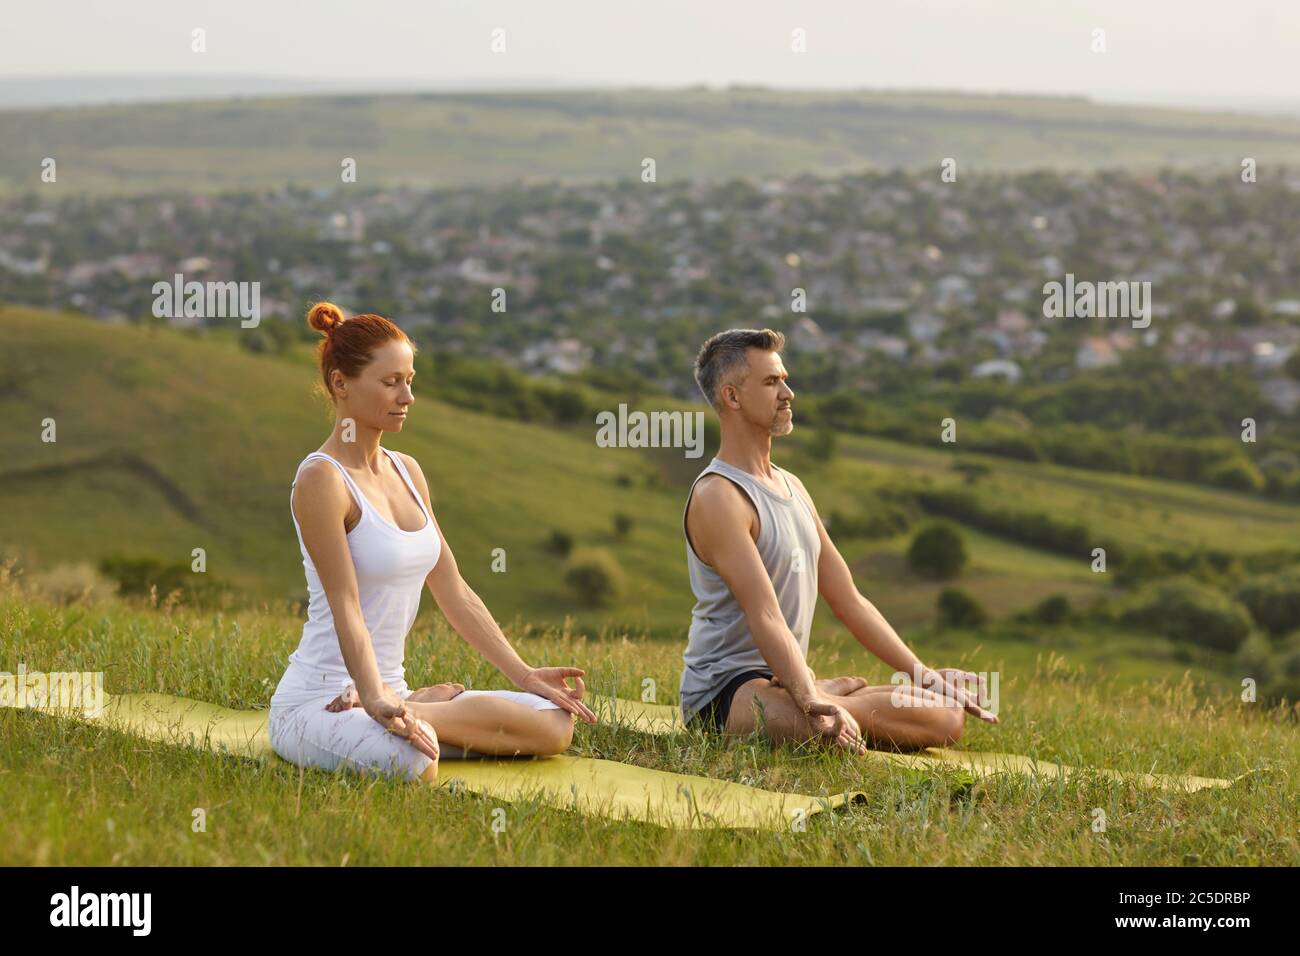 Yoga in nature. Millennial couple doing yoga meditation in mountains. Man and woman practicing breath exercises outdoors Stock Photo